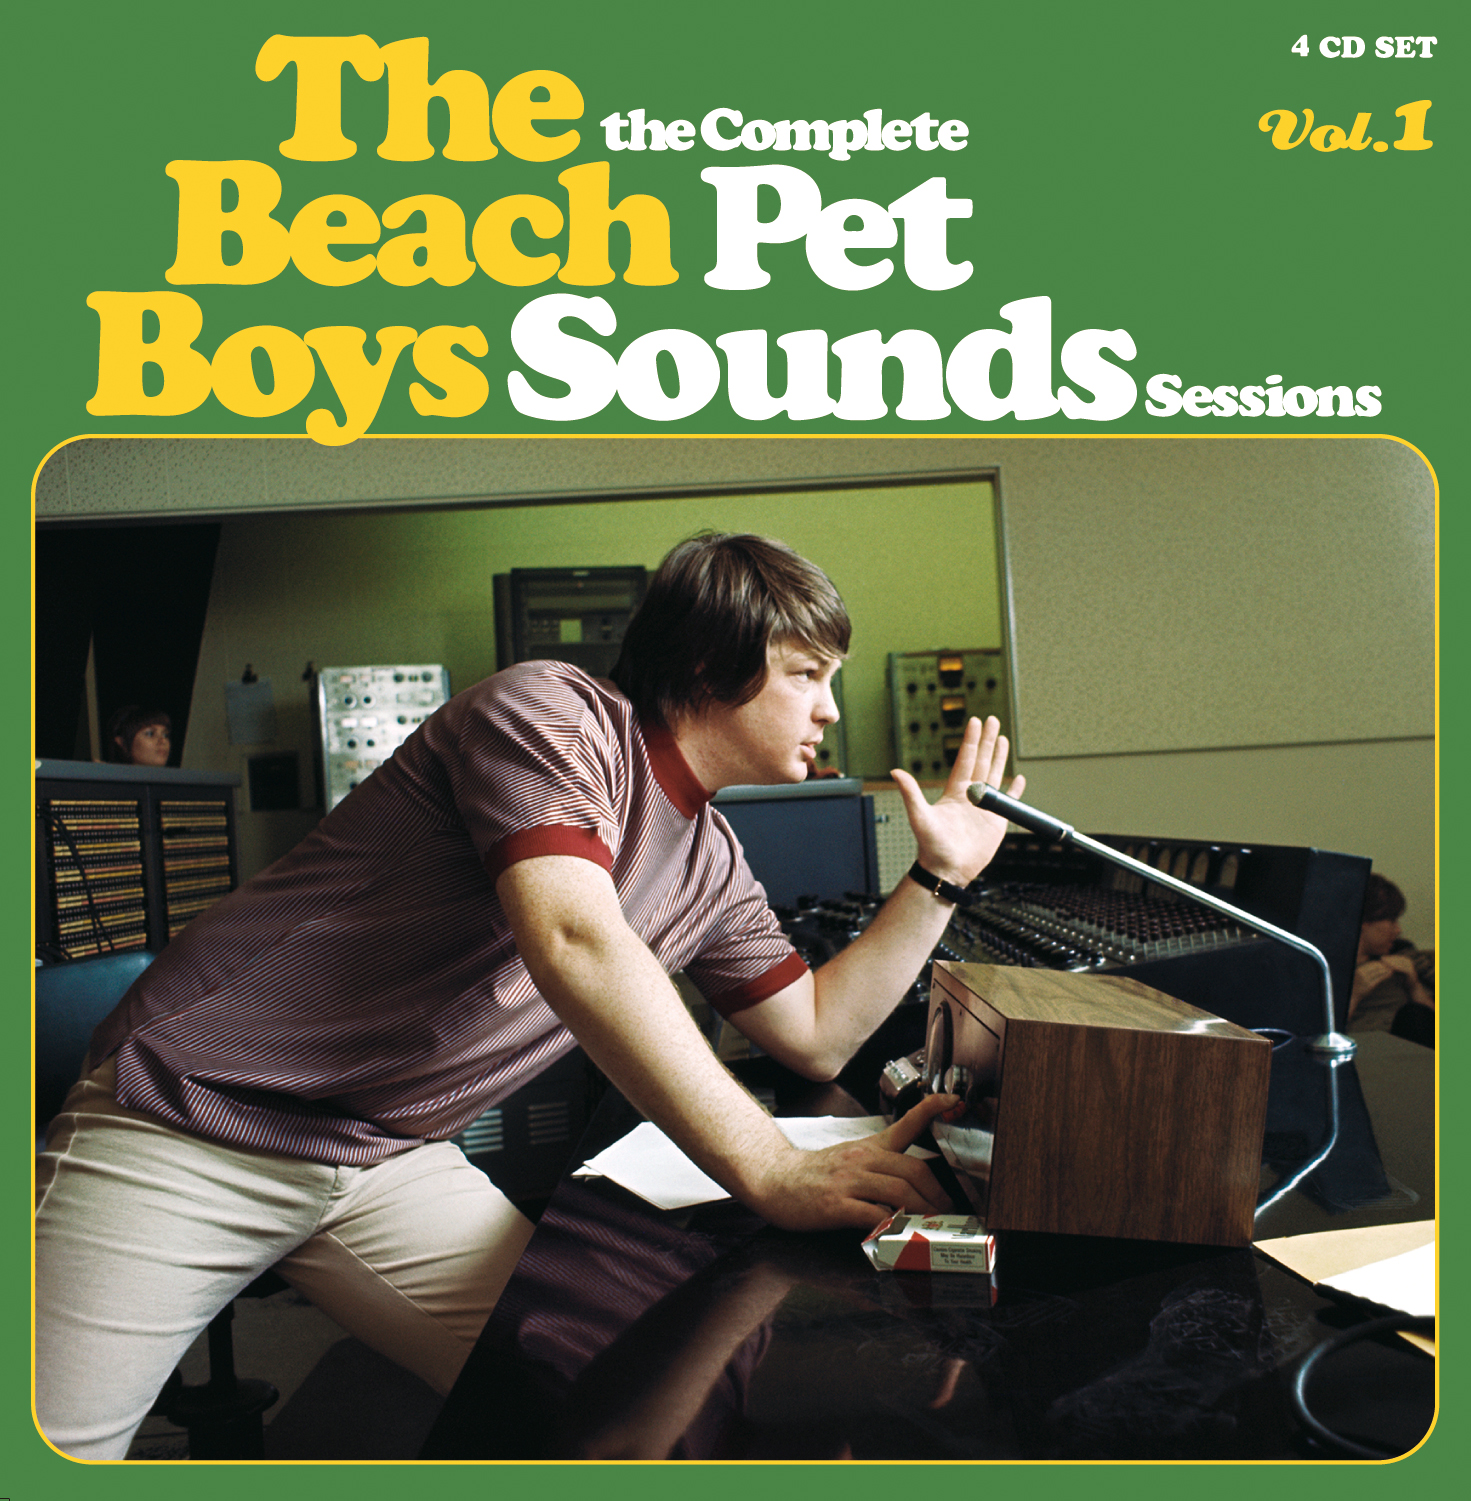 THE BEACH BOYS – the Complete PET SOUNDS Sessions vol.1 ザ・ビーチ 